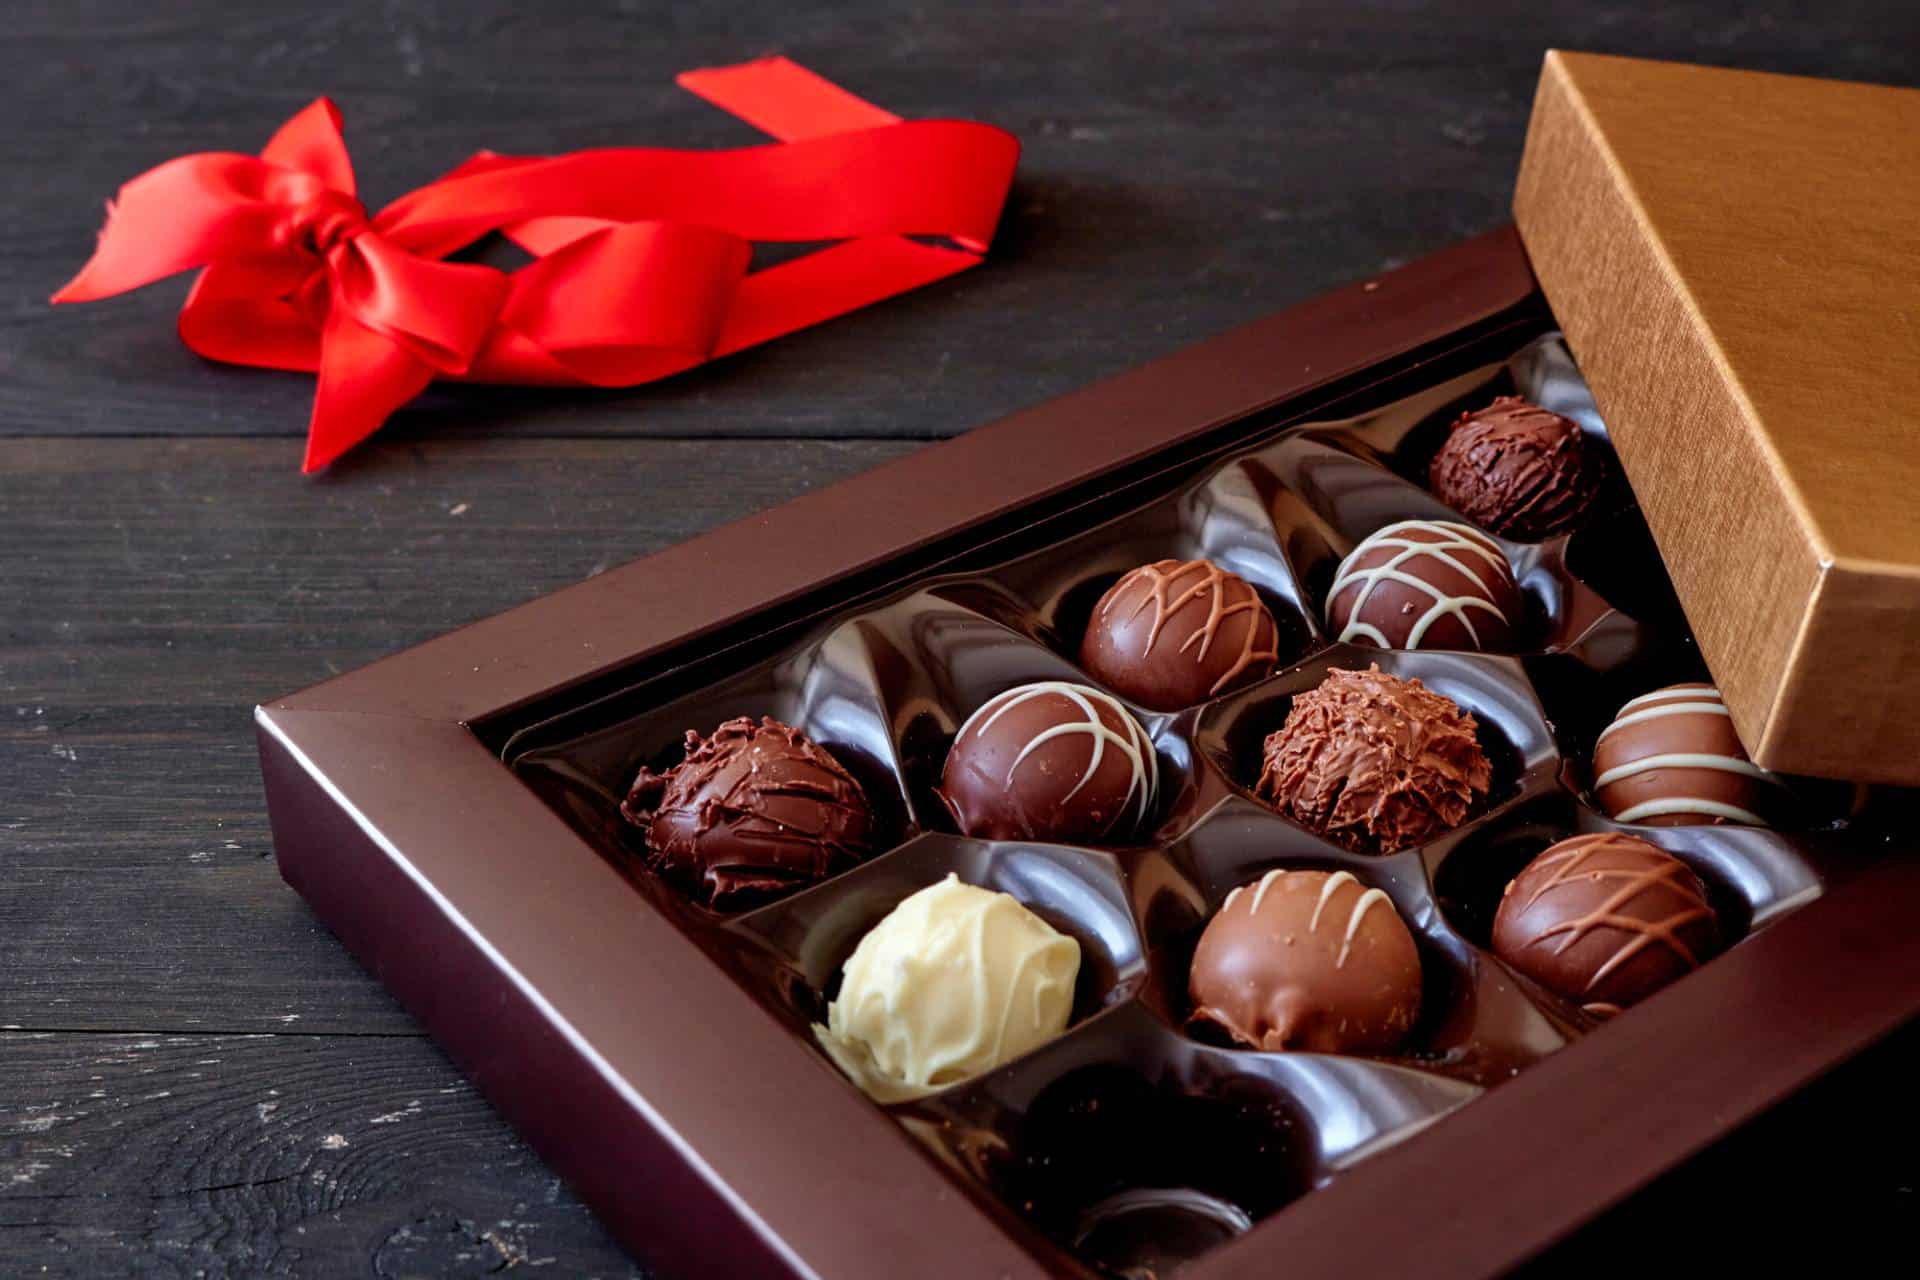 Who makes the best chocolates and where are their factories located?